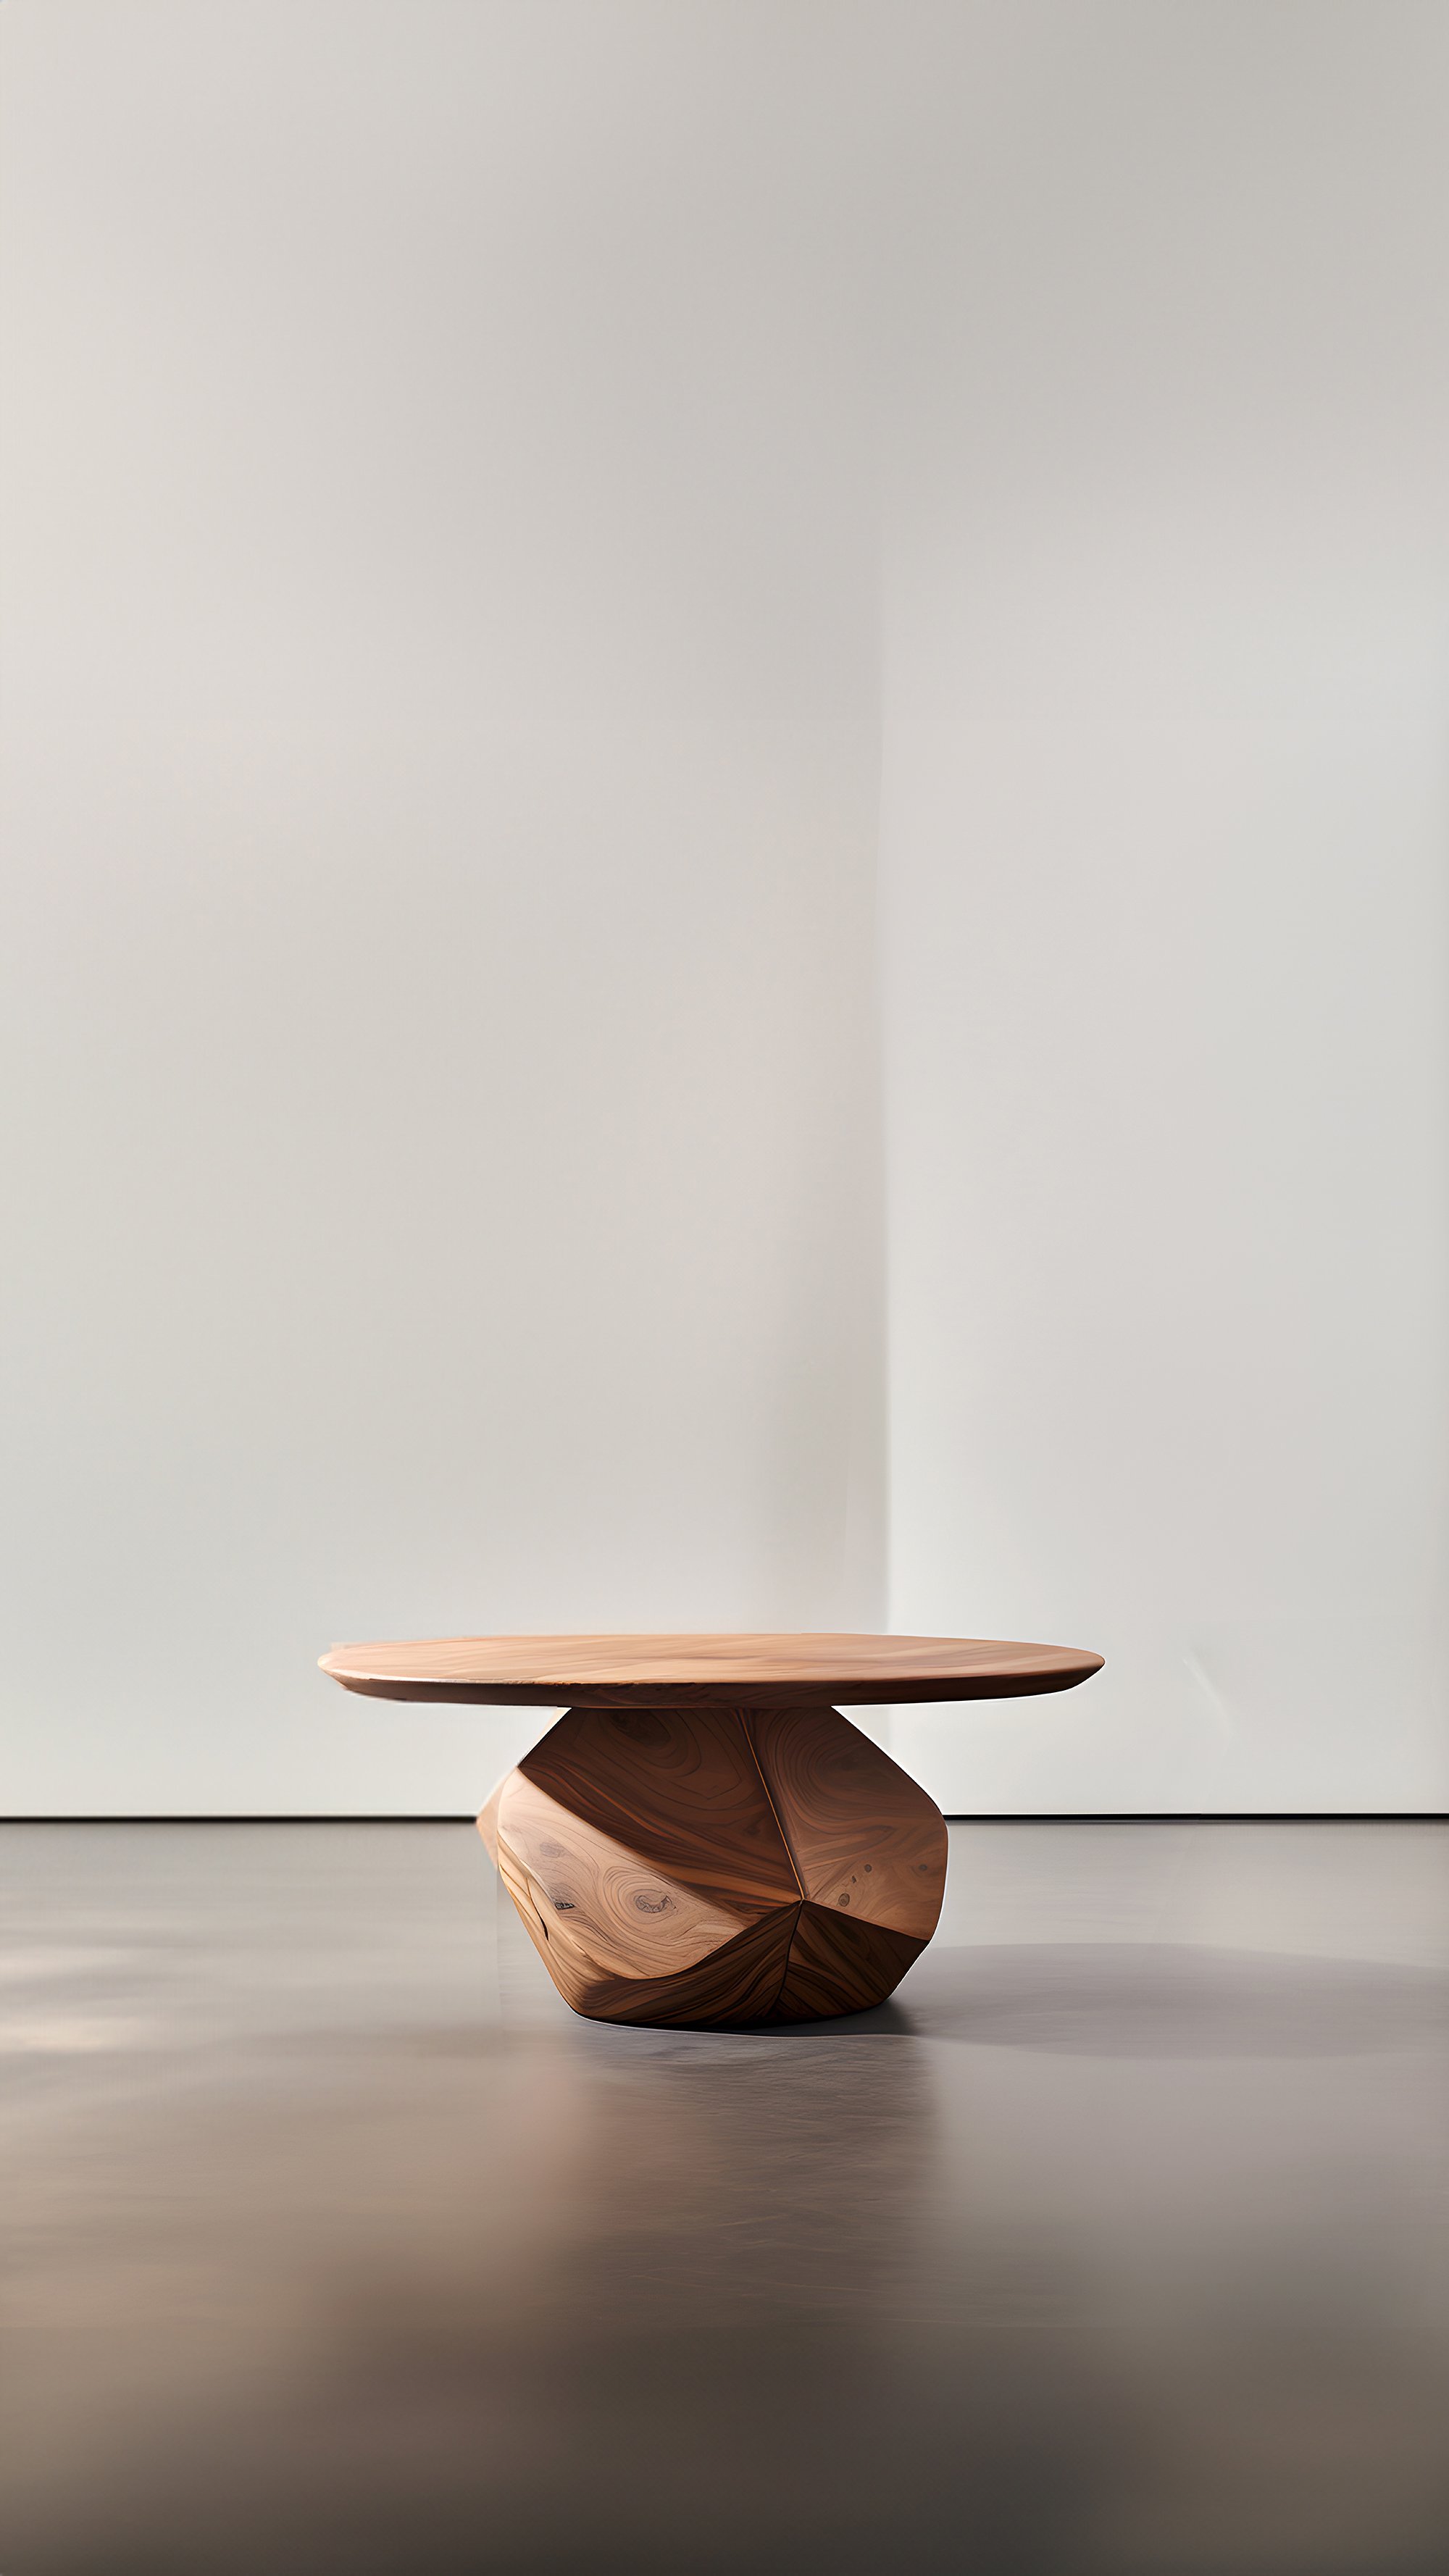 Sculptural Coffee Table Made of Solid Wood, Center Table Solace S35 by Joel Escalona — 8.jpg